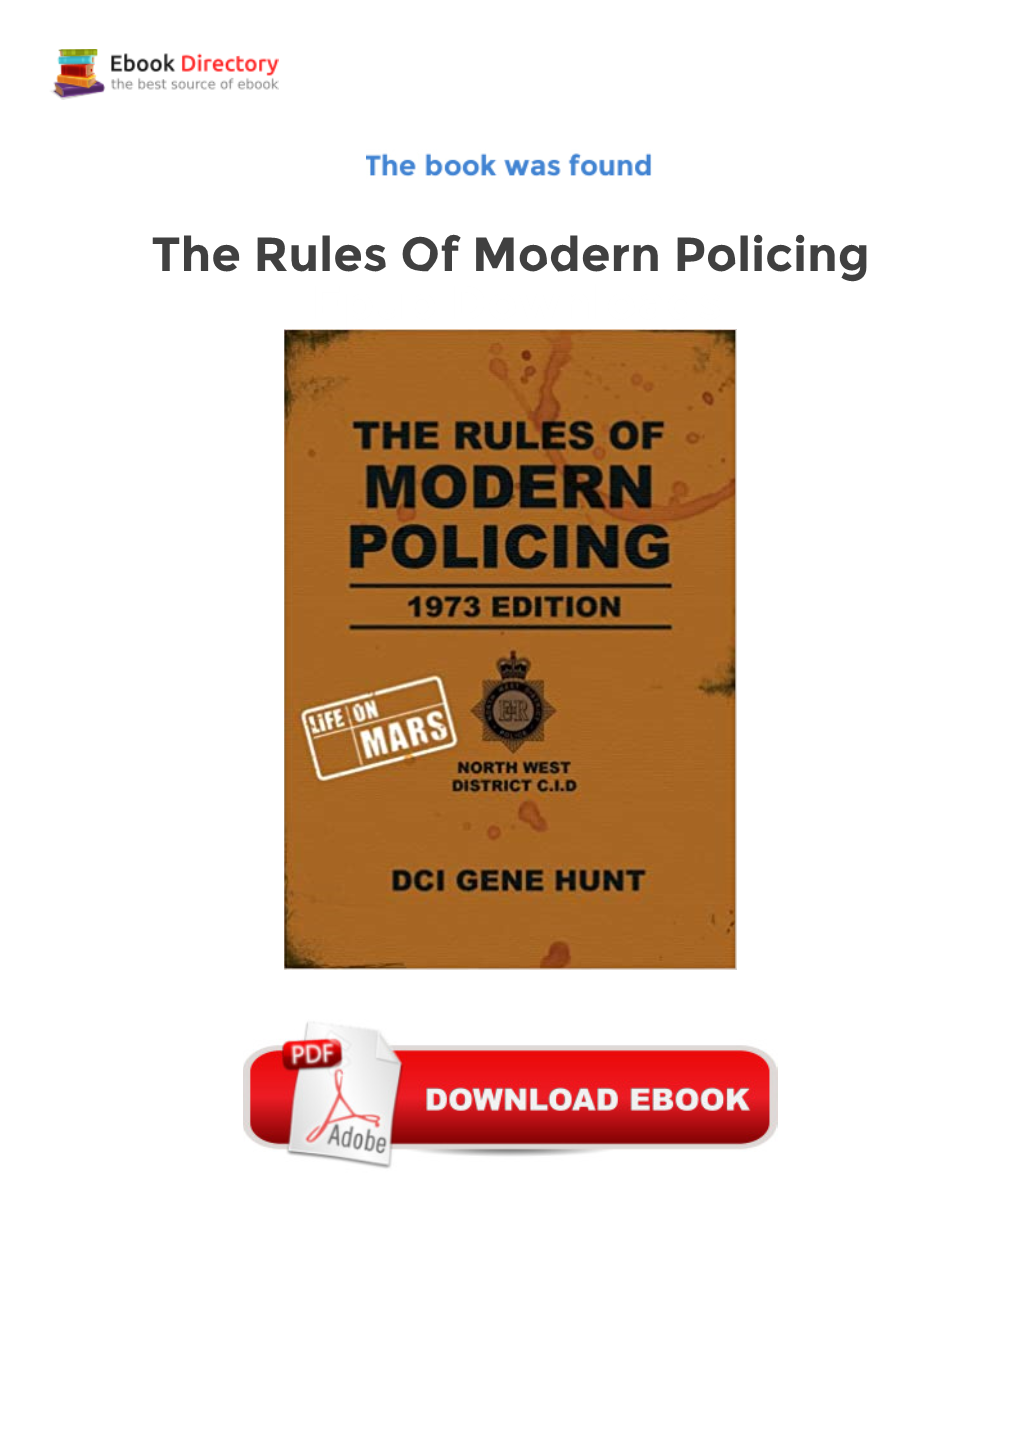 The Rules of Modern Policing Epub Downloads DCI Gene Hunt, Star of 'Life on Mars', Brings Us a Guide to Policing, '70S Style